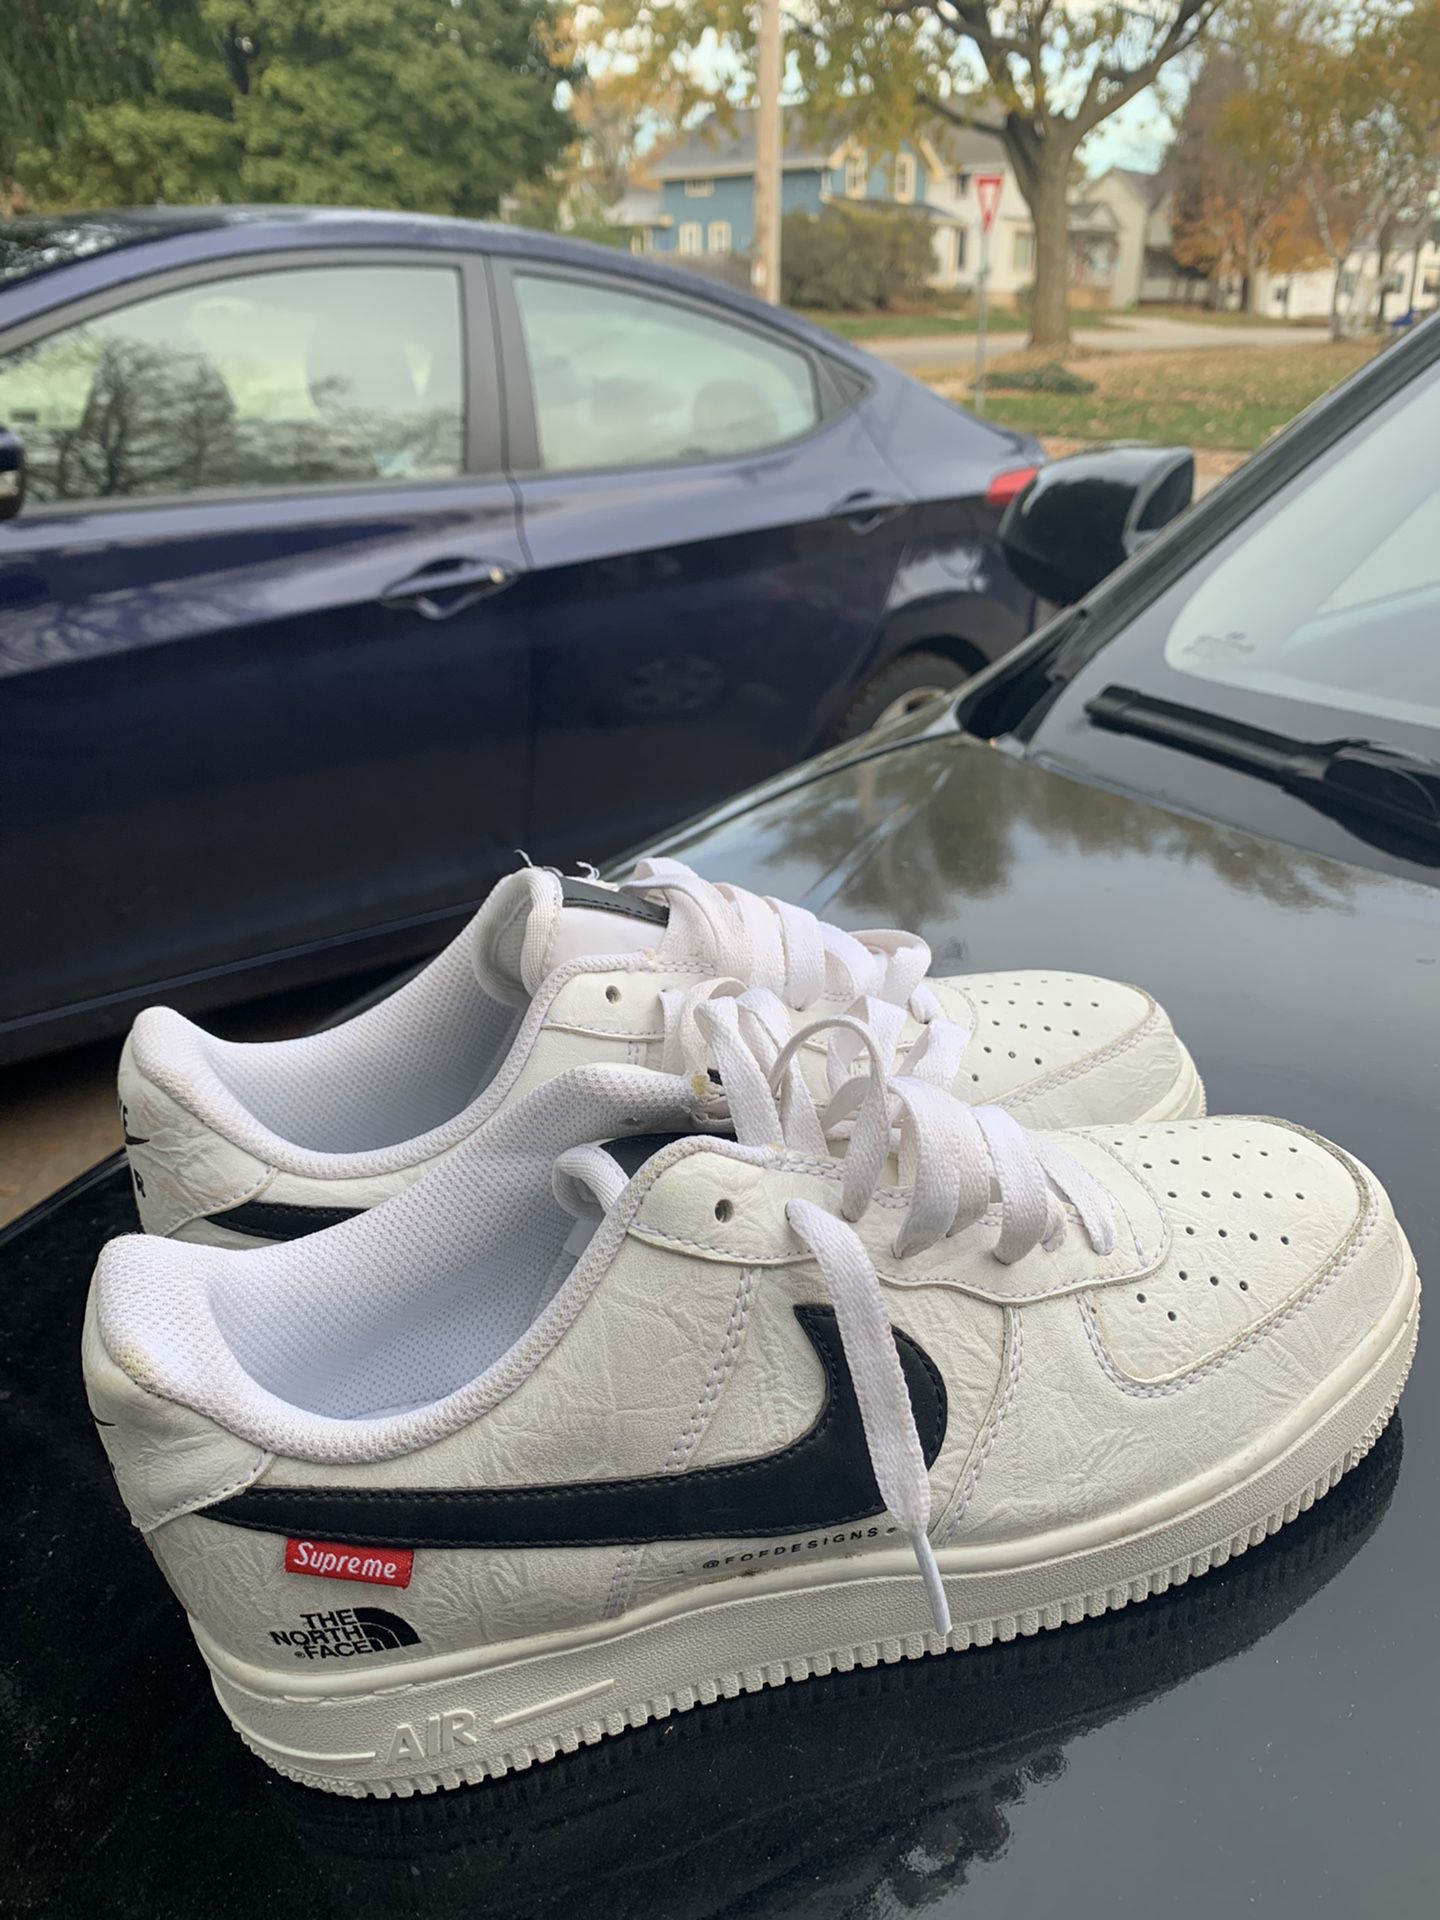 Nike Air Force 1 by FOFDESIGNS SUPREME x THE NORTH FACE size 8